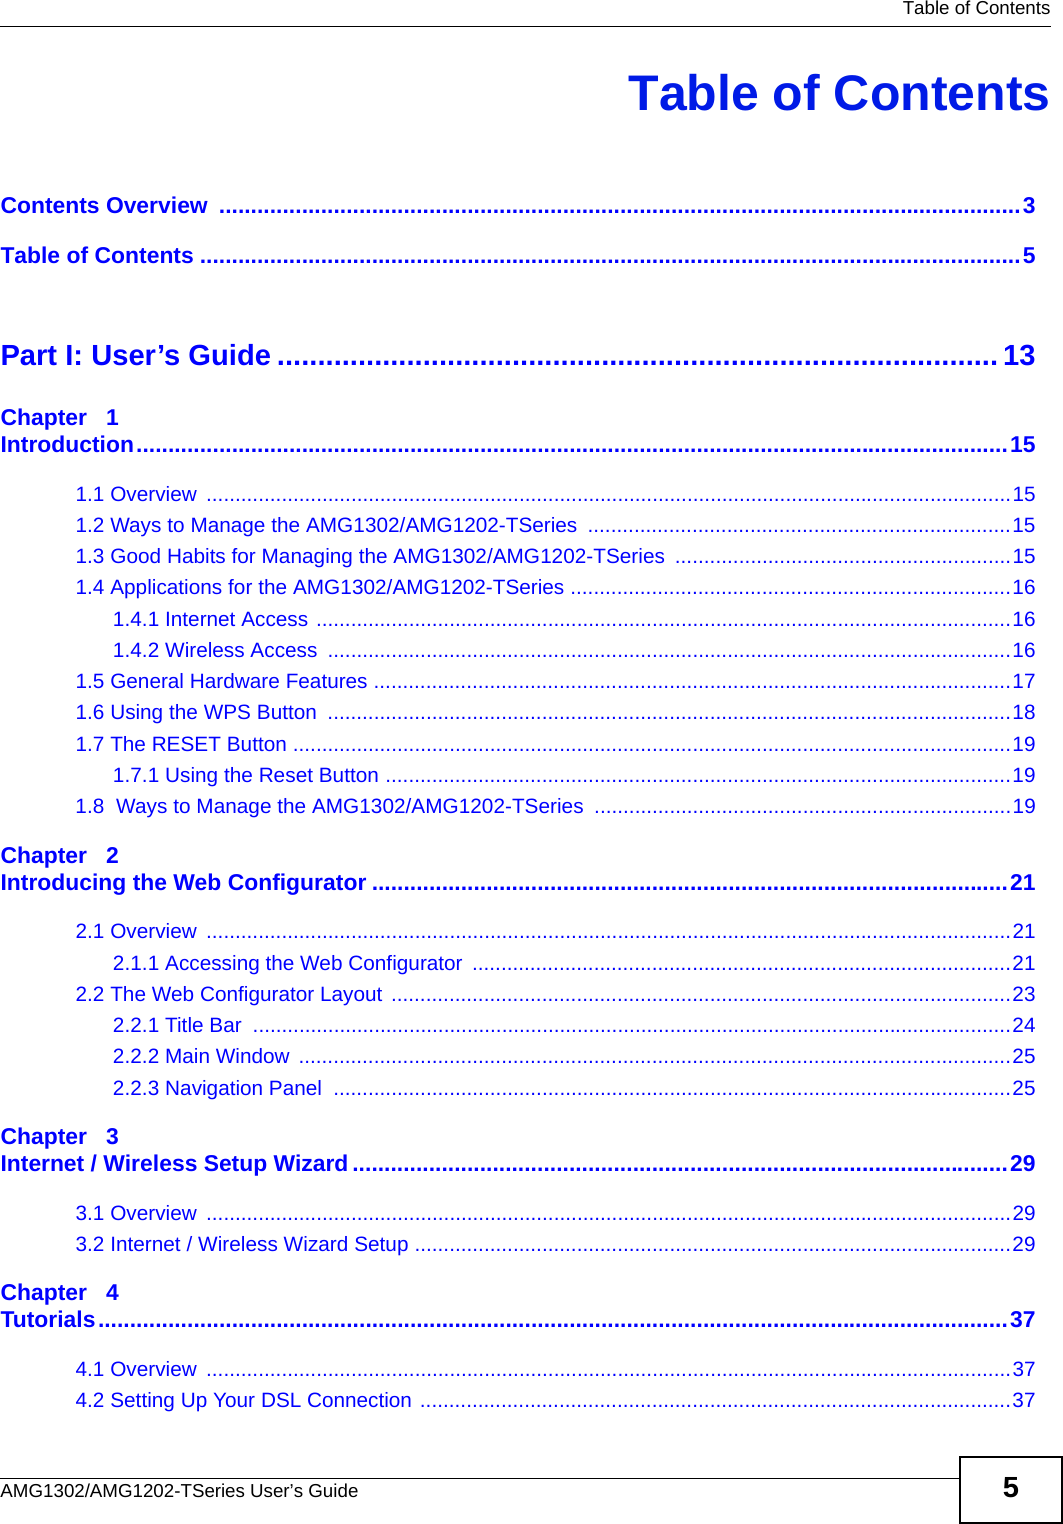   Table of ContentsAMG1302/AMG1202-TSeries User’s Guide 5Table of ContentsContents Overview  ..............................................................................................................................3Table of Contents .................................................................................................................................5Part I: User’s Guide ......................................................................................... 13Chapter   1Introduction.........................................................................................................................................151.1 Overview  ...........................................................................................................................................151.2 Ways to Manage the AMG1302/AMG1202-TSeries  .........................................................................151.3 Good Habits for Managing the AMG1302/AMG1202-TSeries ..........................................................151.4 Applications for the AMG1302/AMG1202-TSeries ............................................................................161.4.1 Internet Access ........................................................................................................................161.4.2 Wireless Access  ......................................................................................................................161.5 General Hardware Features ..............................................................................................................171.6 Using the WPS Button  ......................................................................................................................181.7 The RESET Button ............................................................................................................................191.7.1 Using the Reset Button ............................................................................................................191.8  Ways to Manage the AMG1302/AMG1202-TSeries  ........................................................................19Chapter   2Introducing the Web Configurator ....................................................................................................212.1 Overview  ...........................................................................................................................................212.1.1 Accessing the Web Configurator  .............................................................................................212.2 The Web Configurator Layout ...........................................................................................................232.2.1 Title Bar  ...................................................................................................................................242.2.2 Main Window  ...........................................................................................................................252.2.3 Navigation Panel  .....................................................................................................................25Chapter   3Internet / Wireless Setup Wizard.......................................................................................................293.1 Overview  ...........................................................................................................................................293.2 Internet / Wireless Wizard Setup .......................................................................................................29Chapter   4Tutorials...............................................................................................................................................374.1 Overview  ...........................................................................................................................................374.2 Setting Up Your DSL Connection ......................................................................................................37